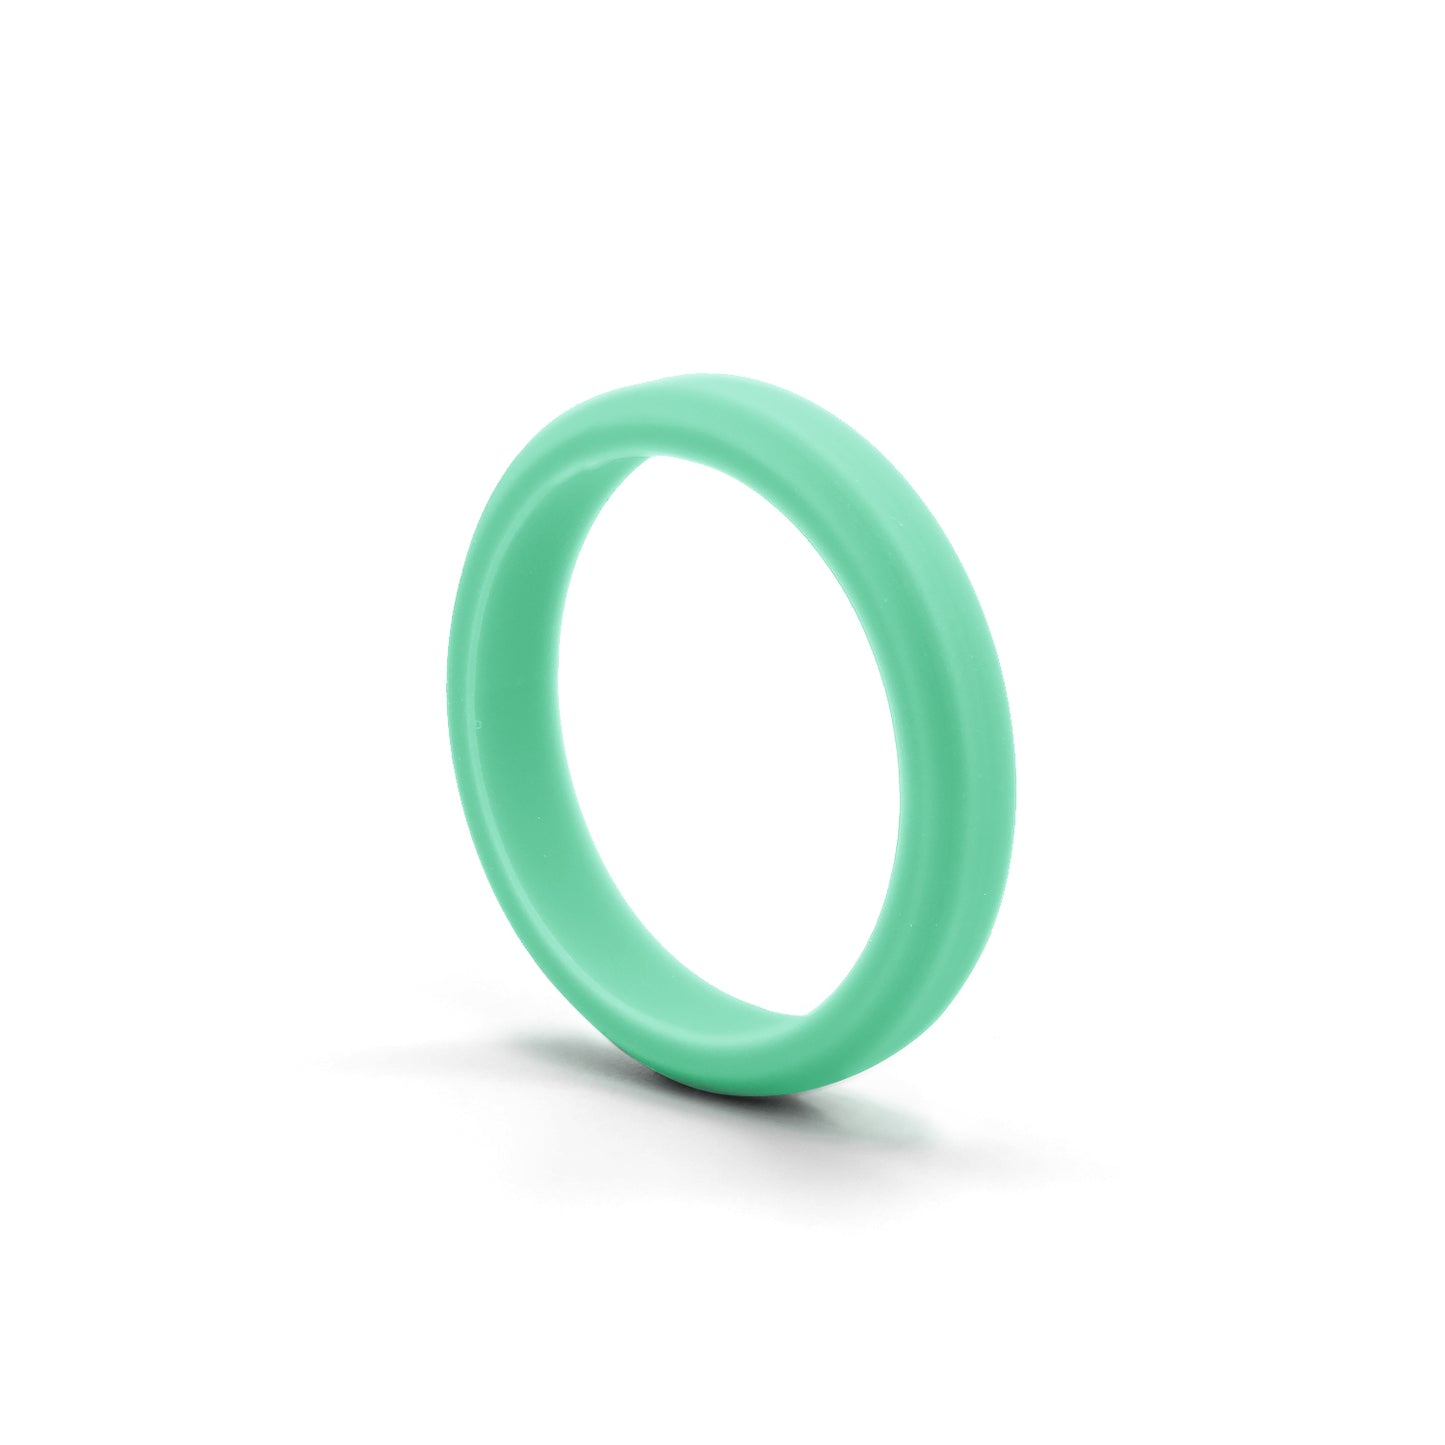 Women's Bevel Silicone Rings